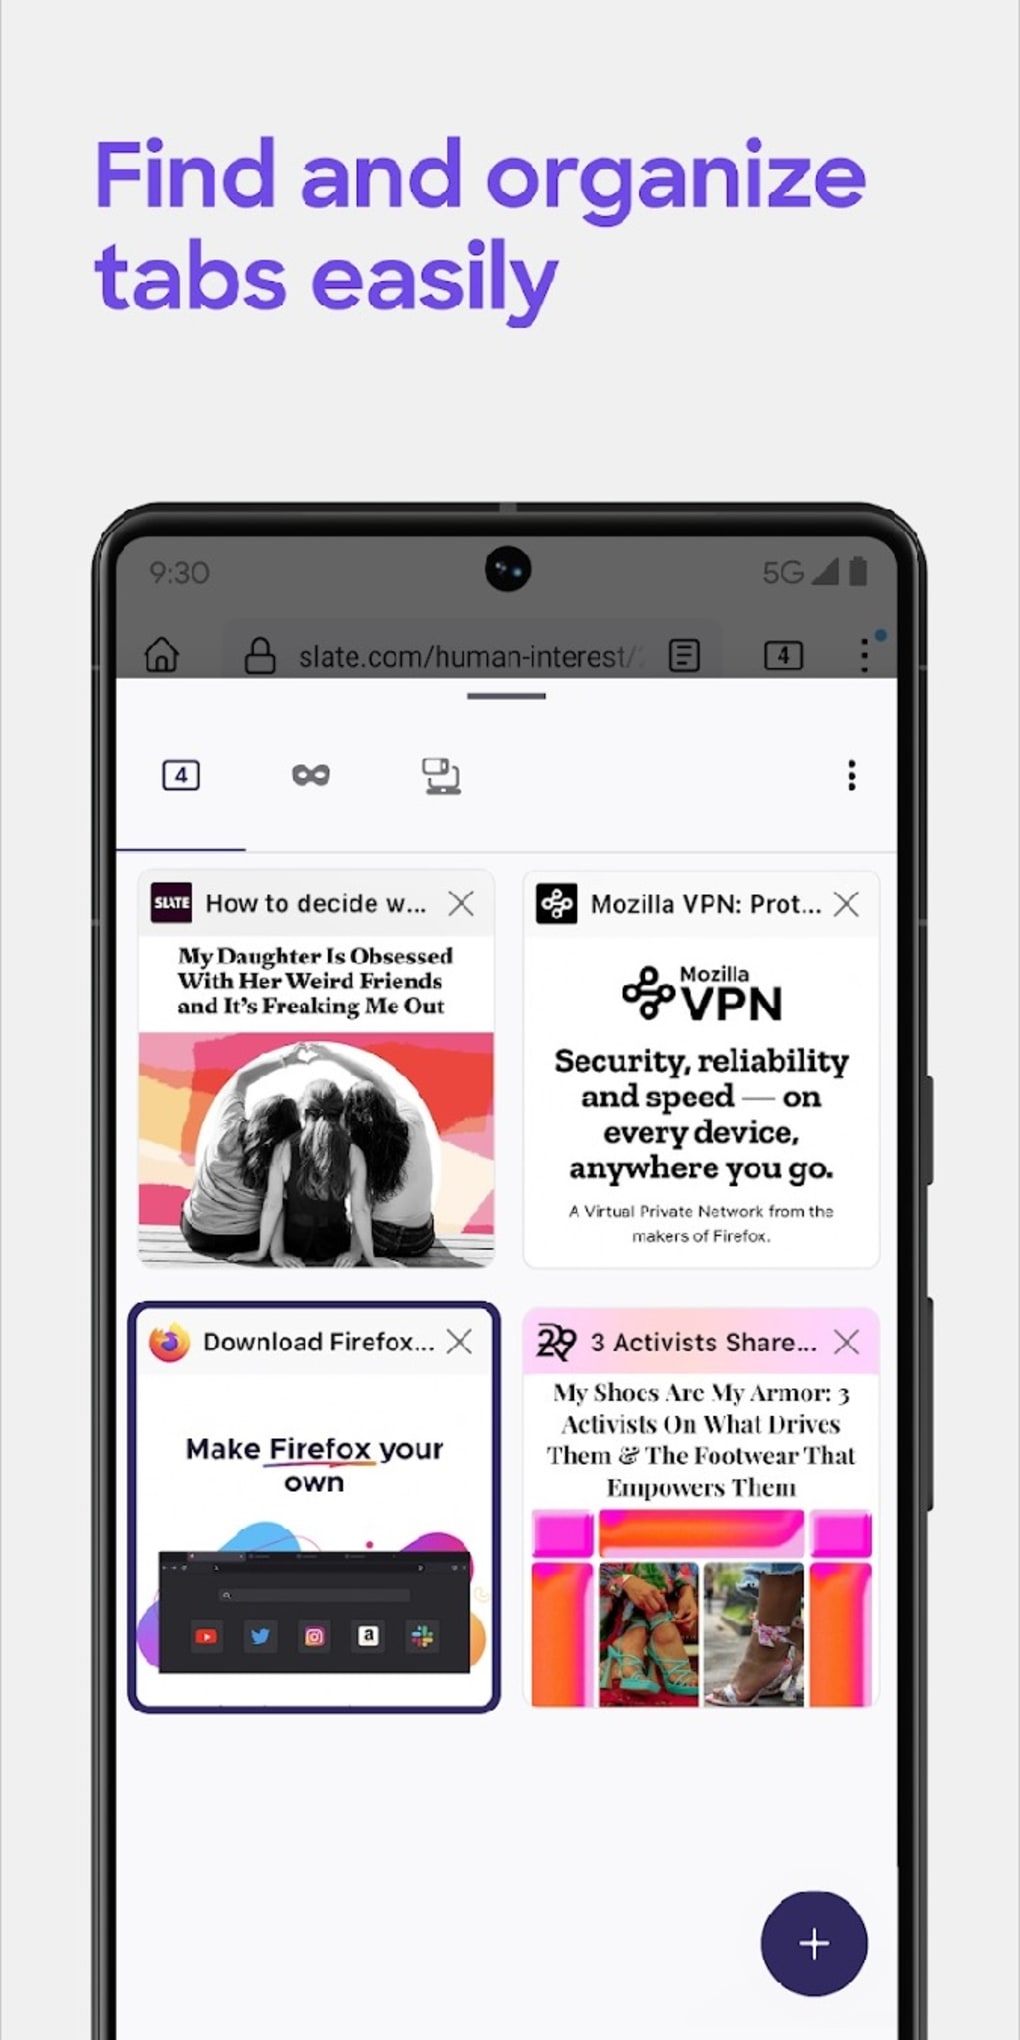 Firefox: Private, Safe Browser on the App Store